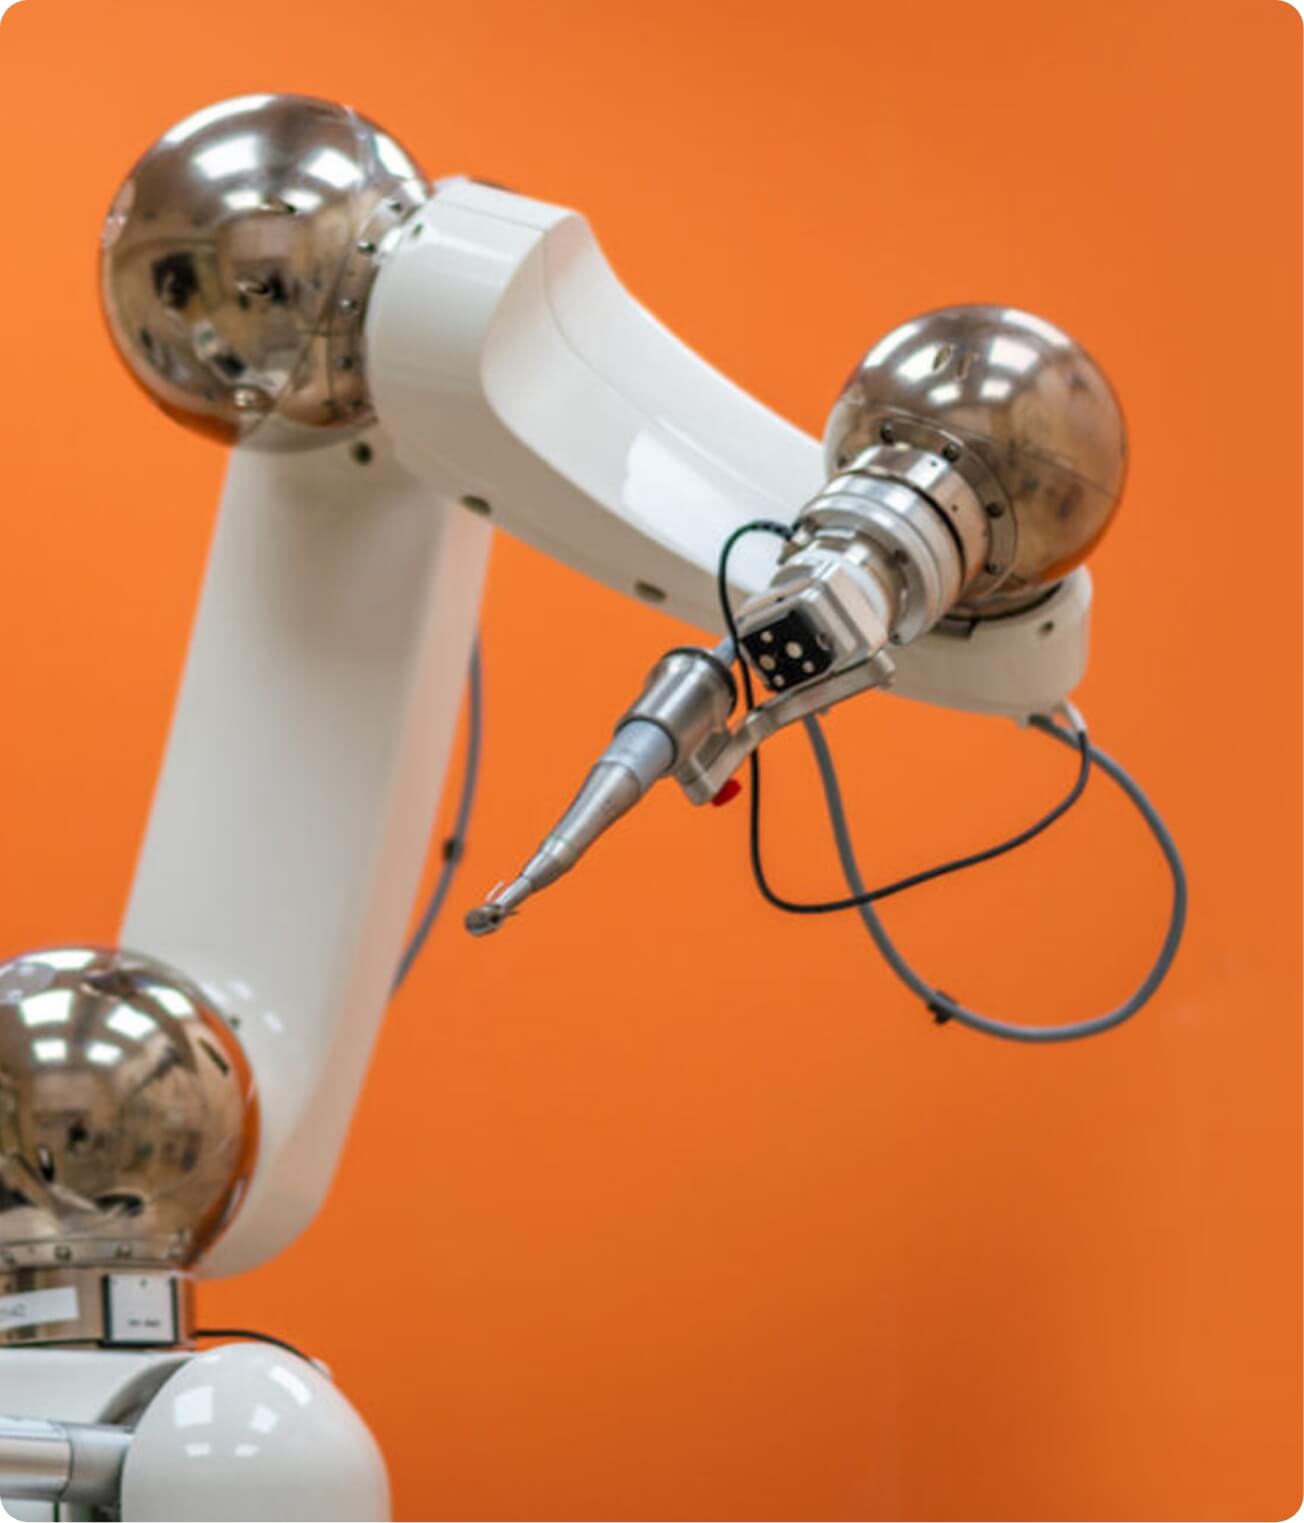 Yomi dental robot, with drill, on an orange background